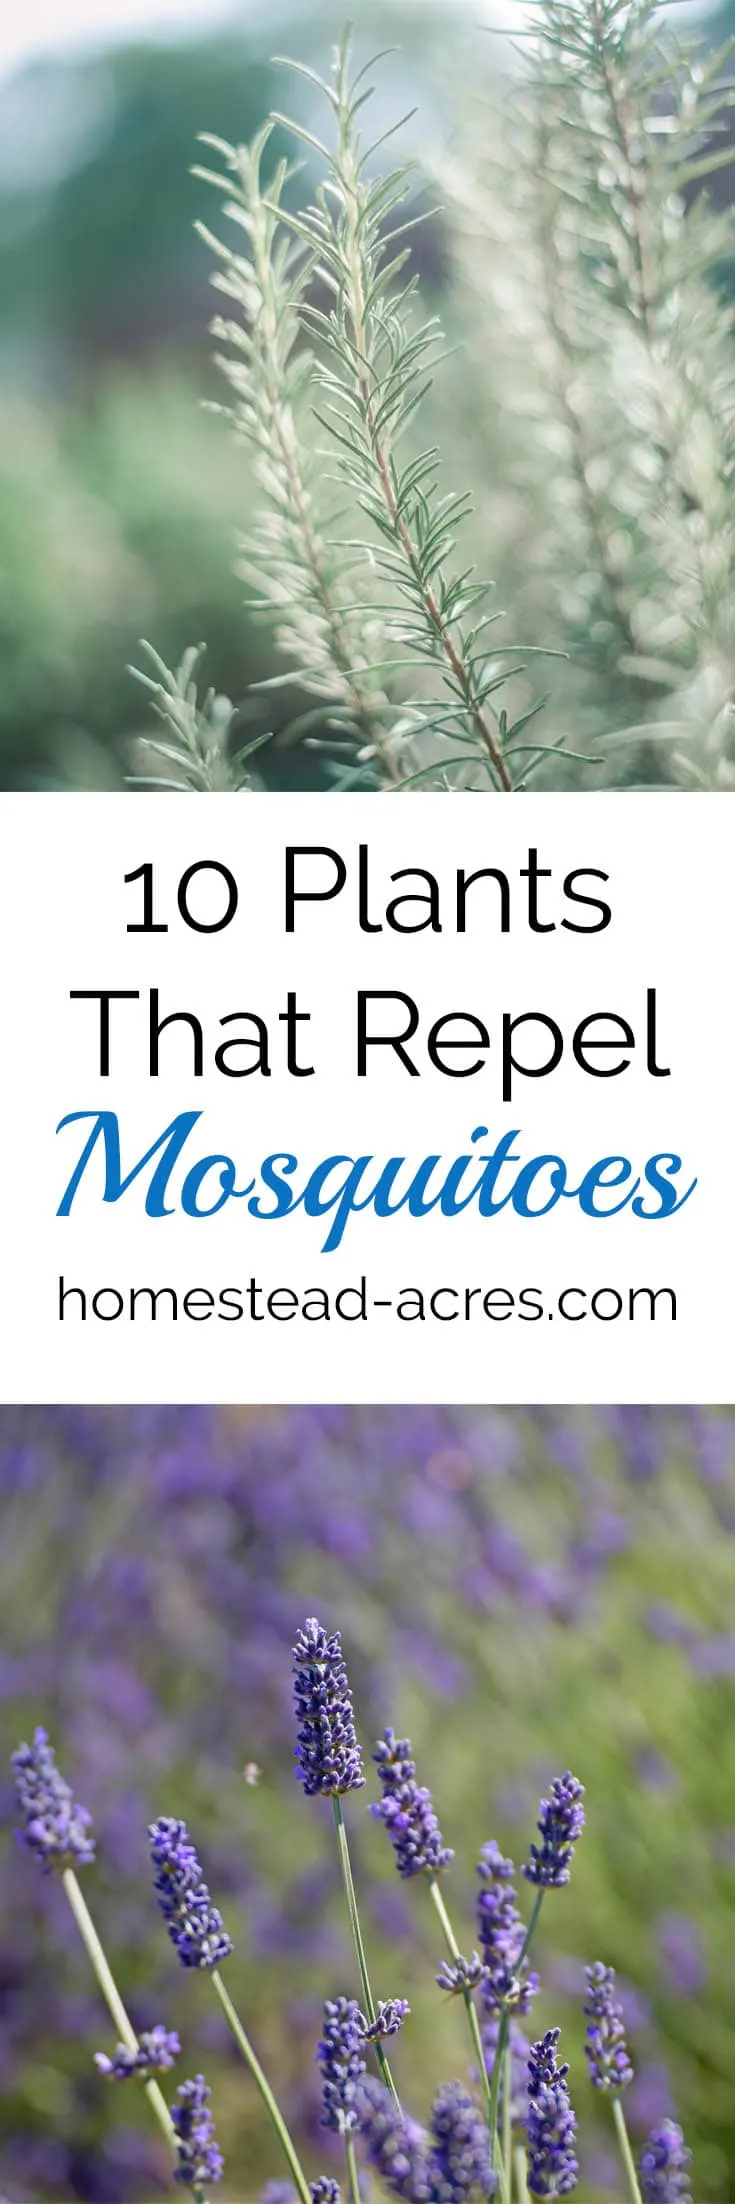 10 Plants That Repel Mosquitoes. Easy to grow flowers and herbs to help keep mosquitoes away.